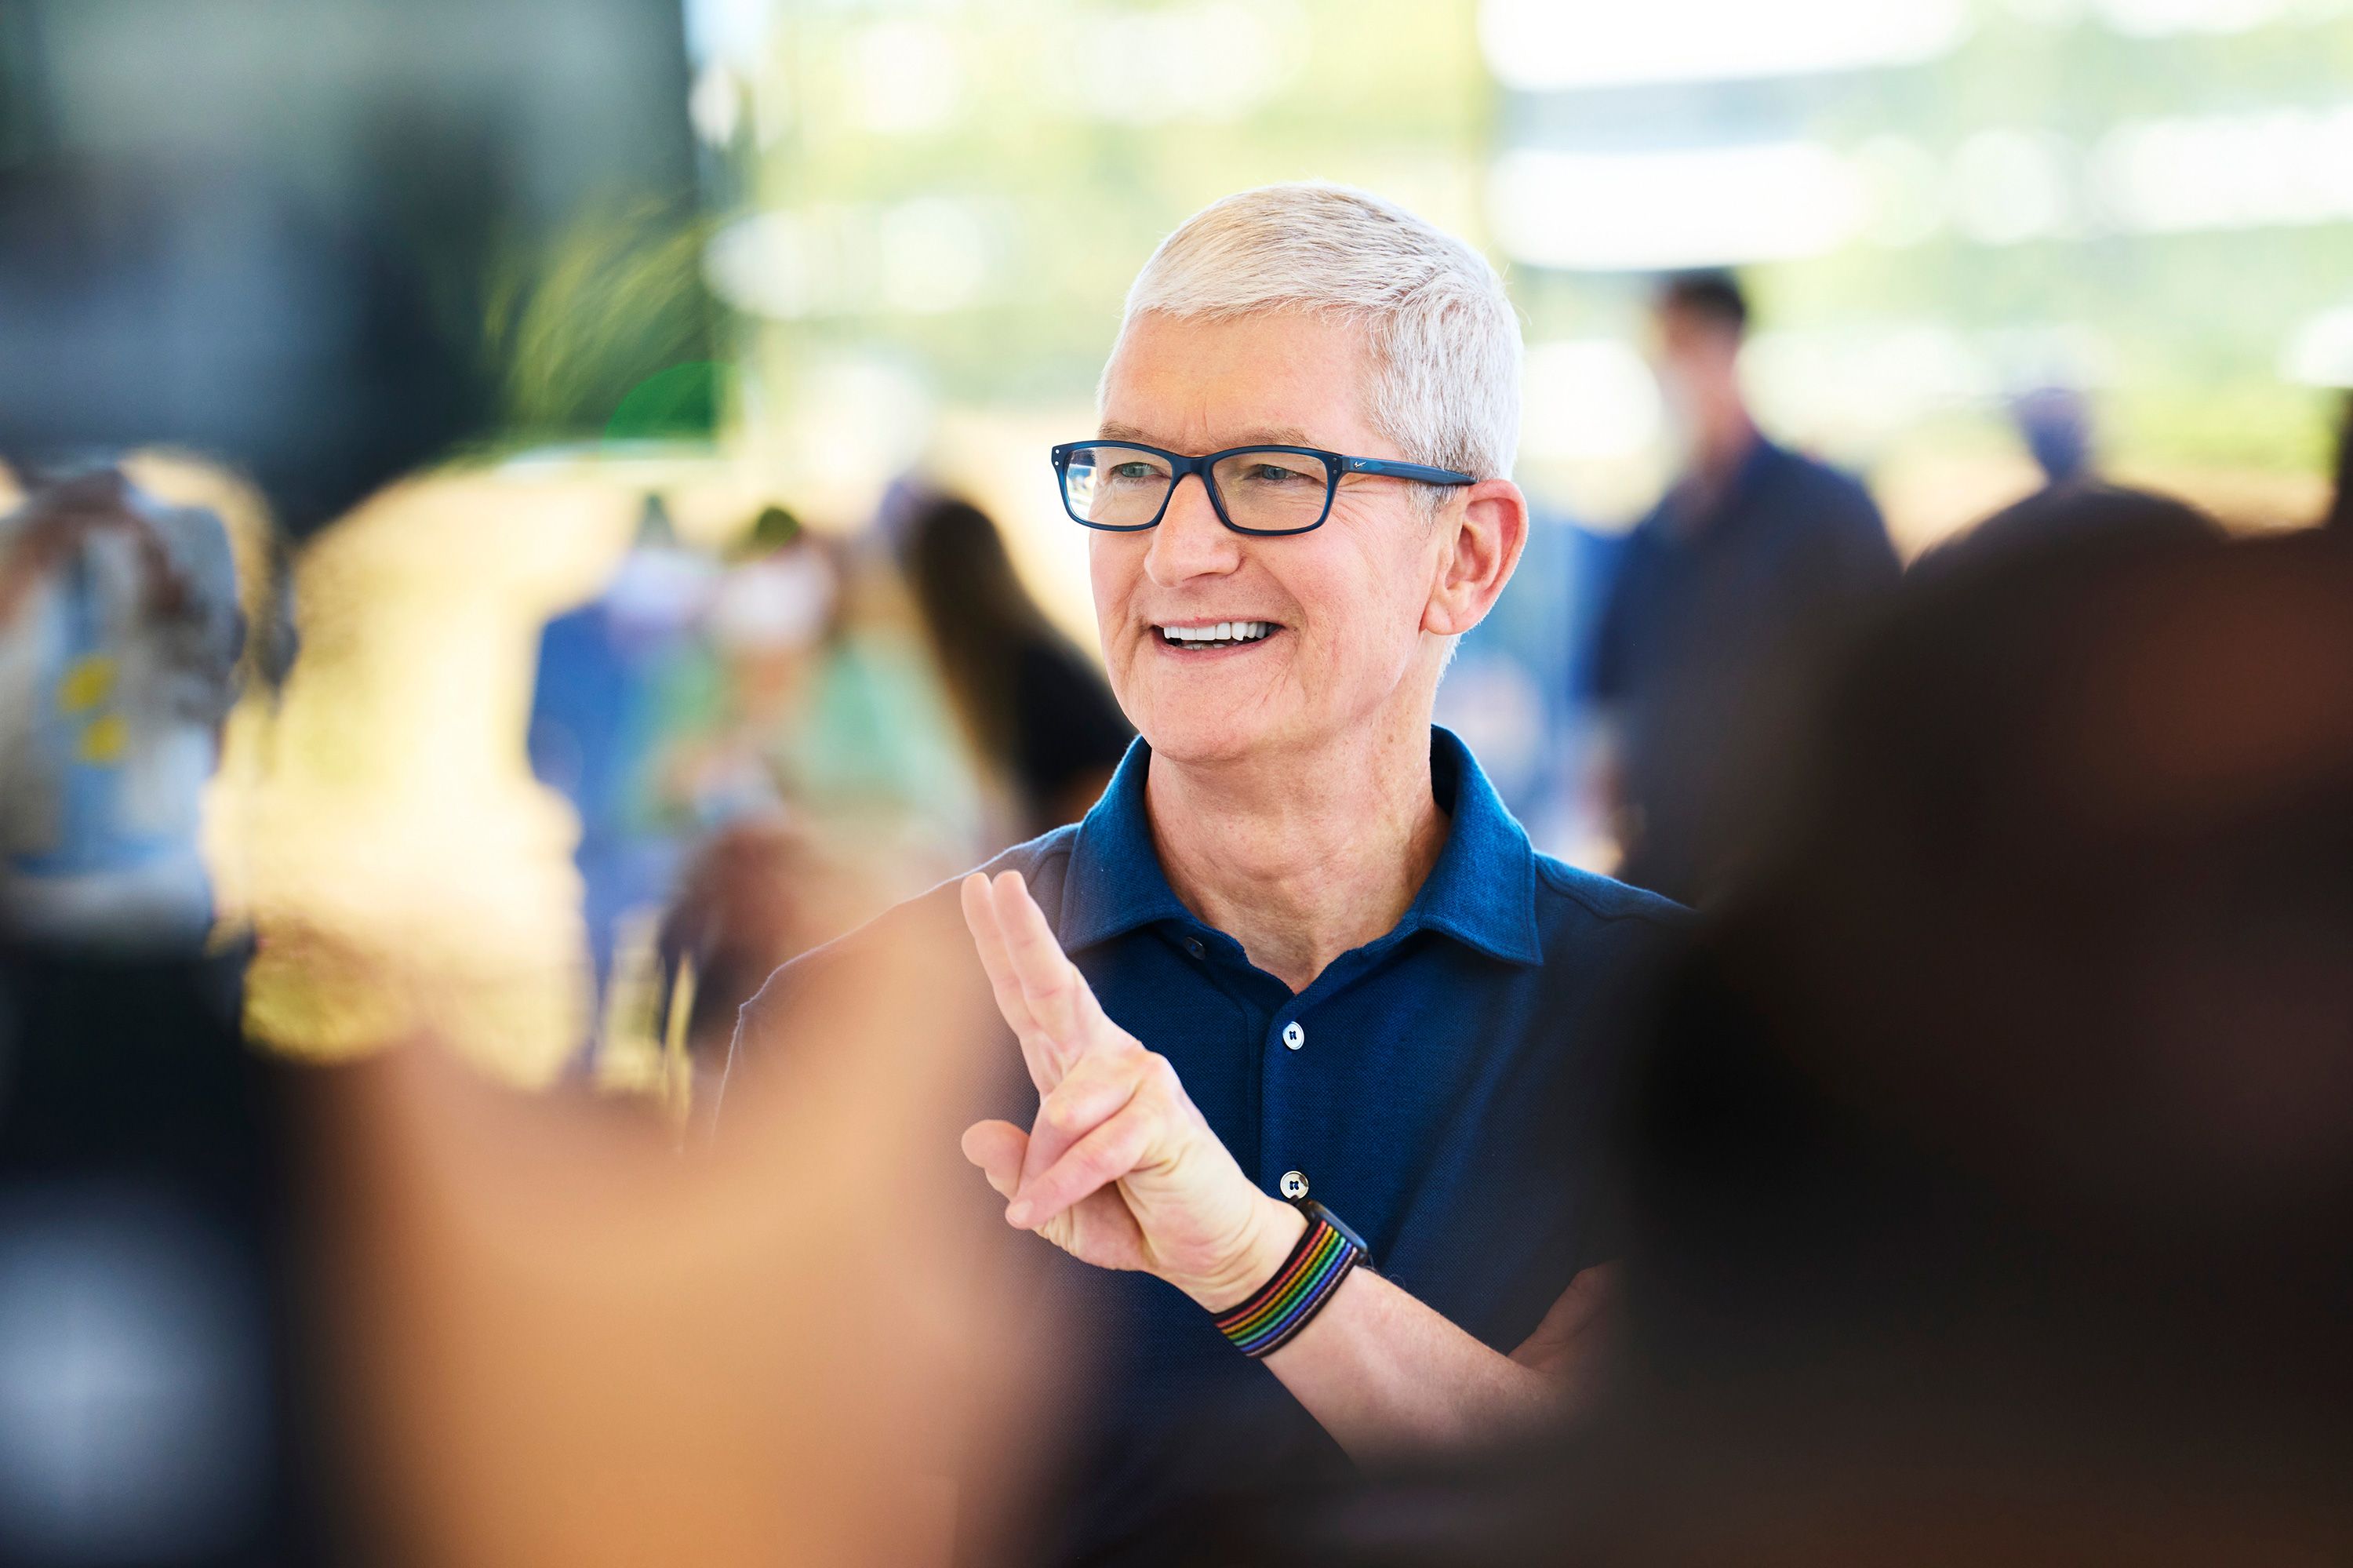 Tim Cook wants you to put down your iPhone